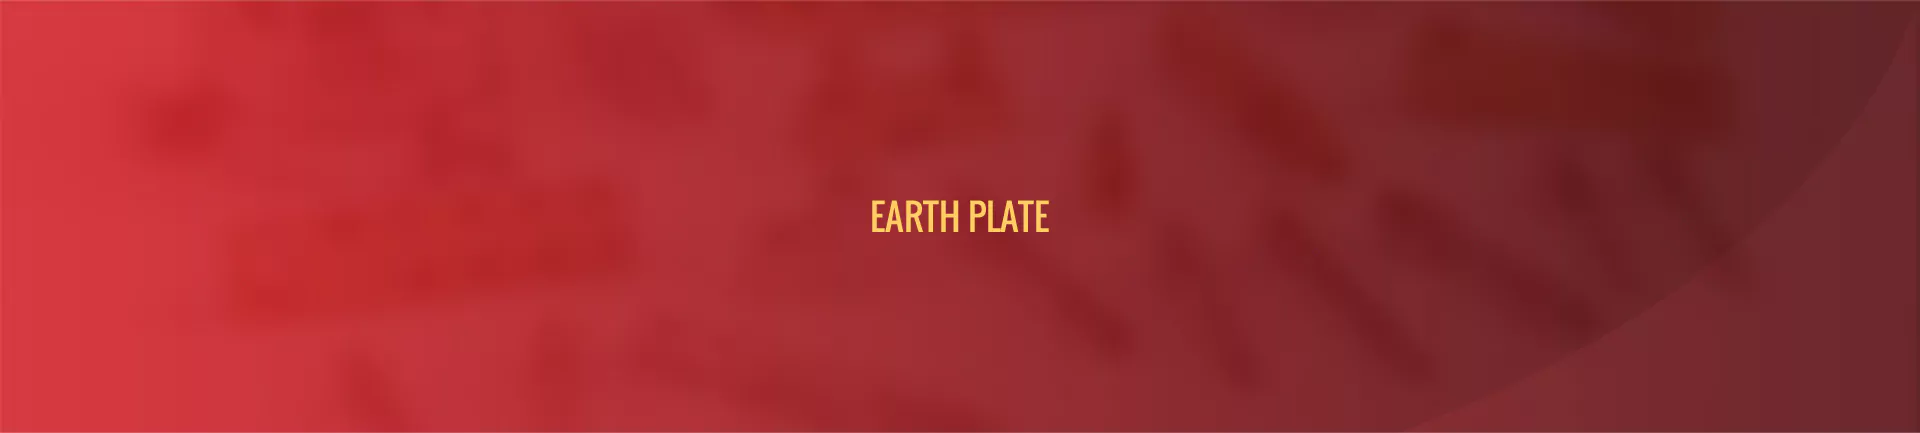 earth-plate-banner